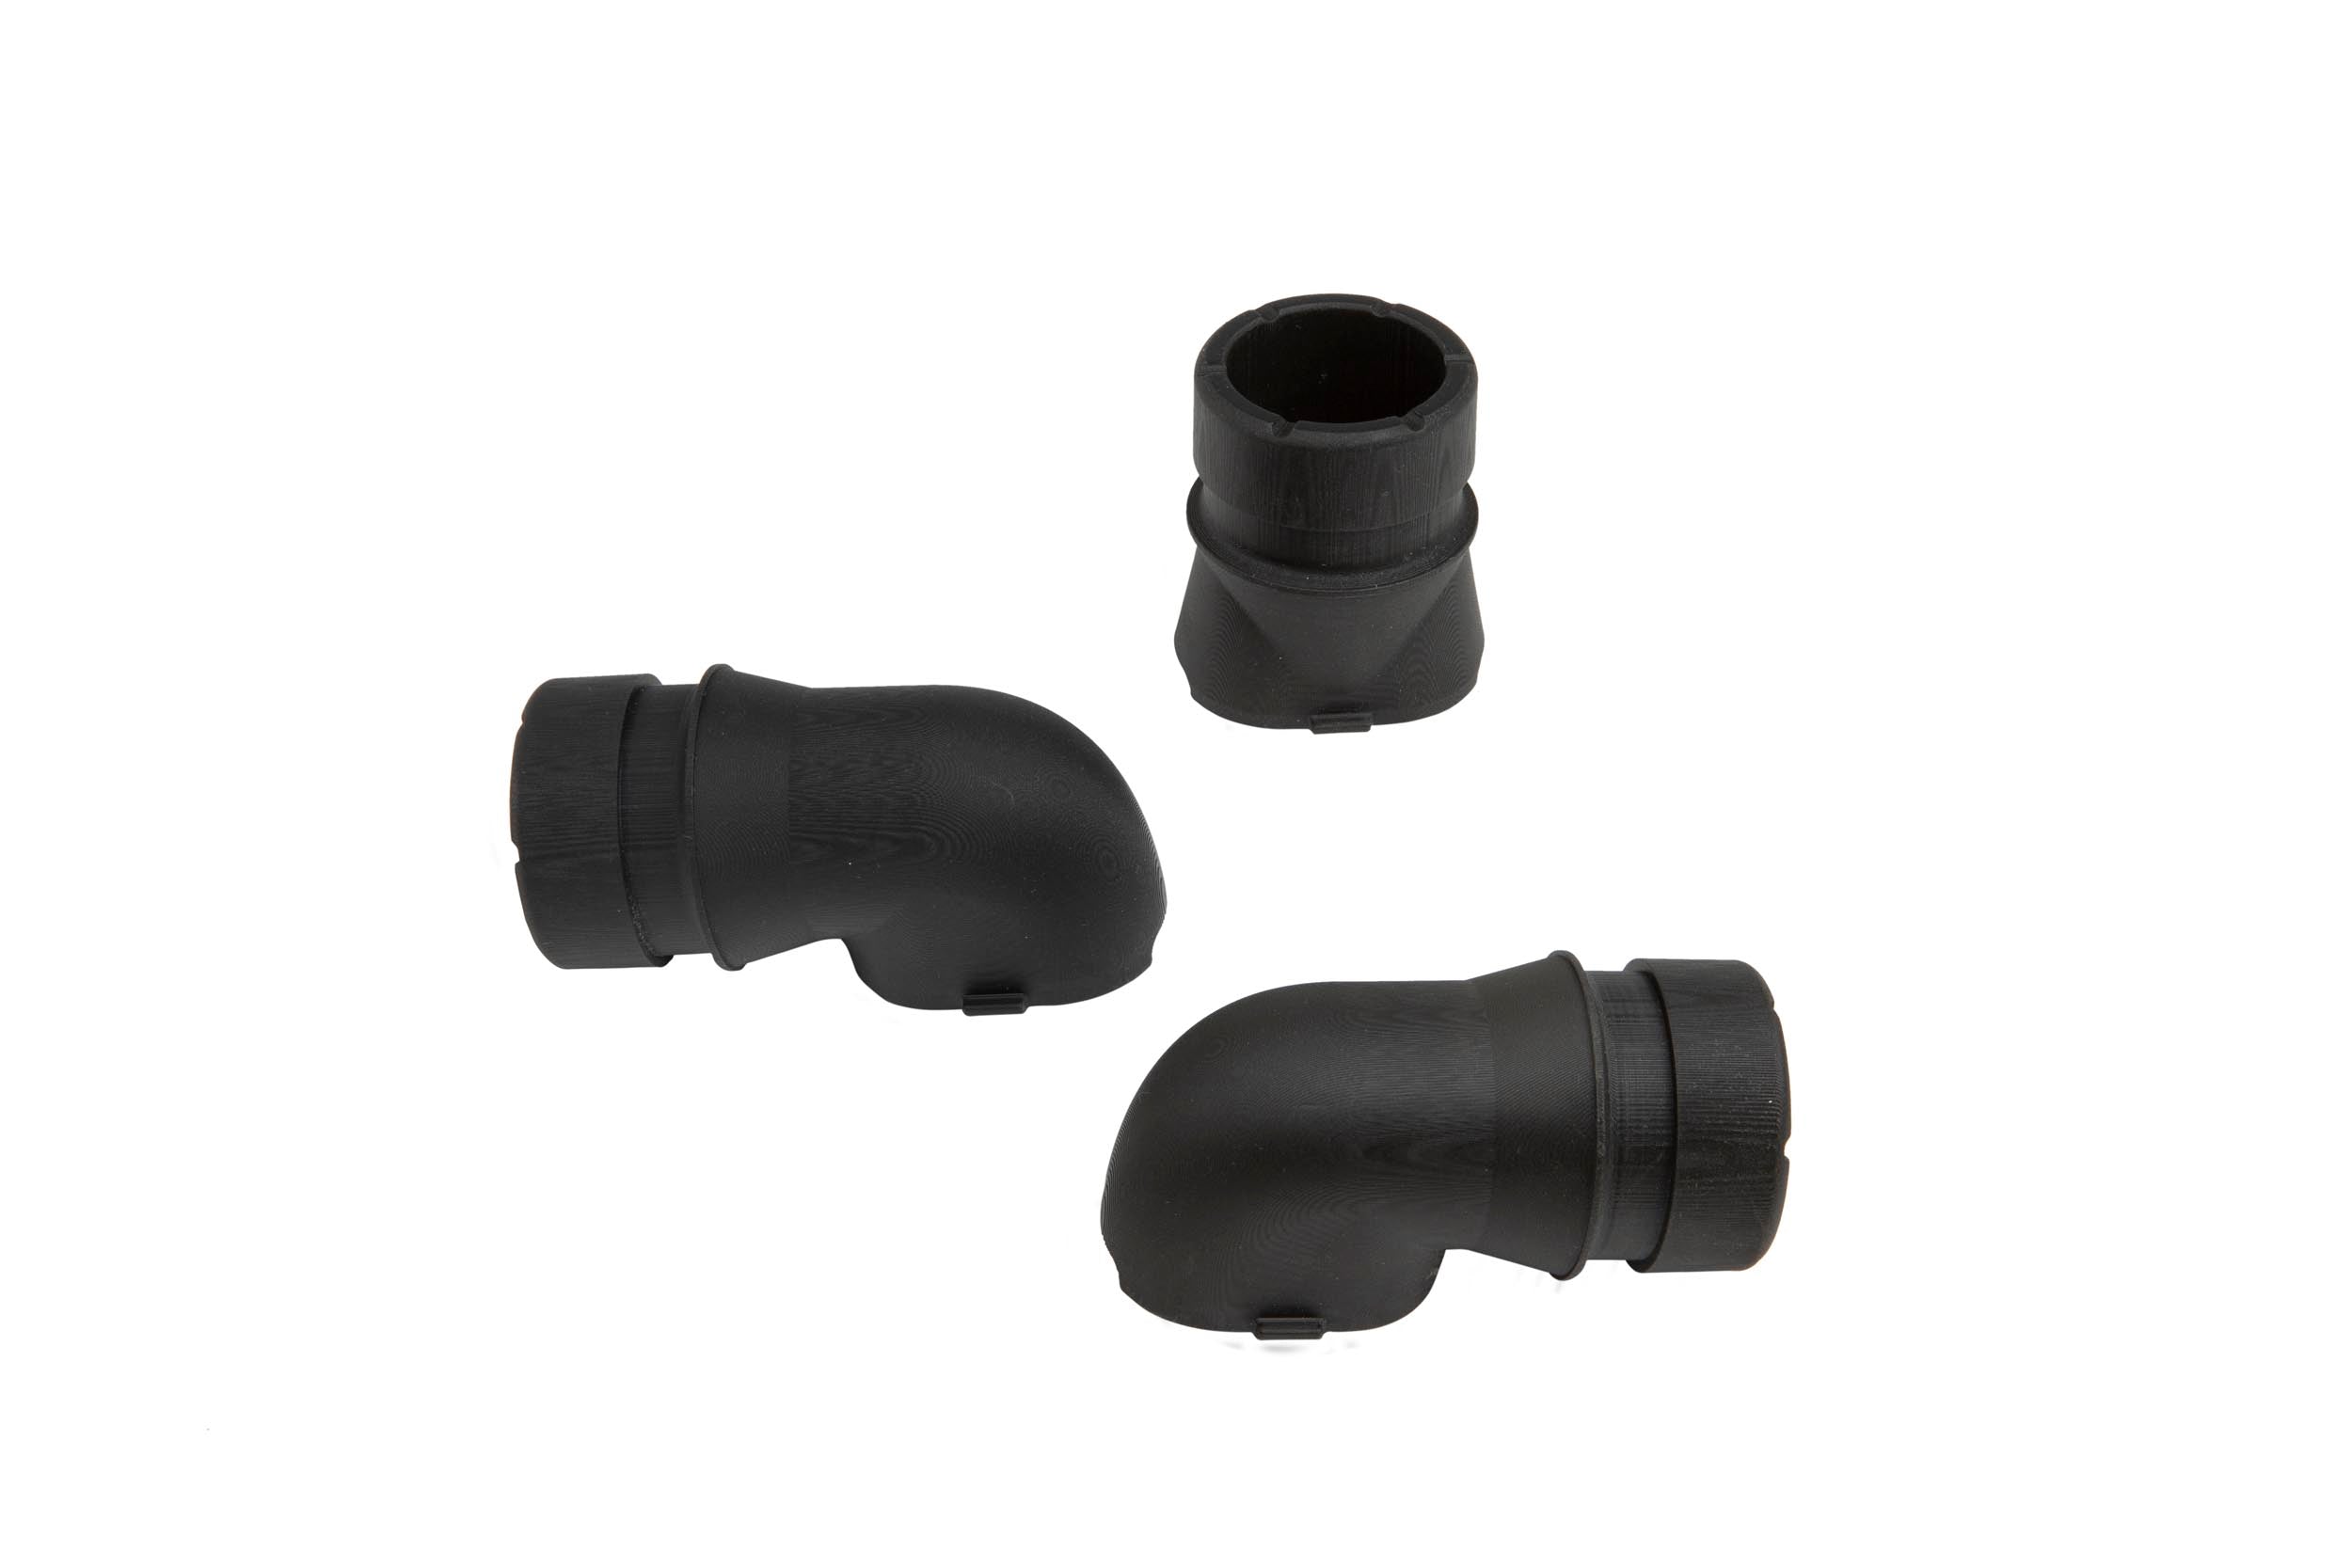 STILO YA0895 Modular 90 degree angled fitting, 32mm (also compatible with Maglock® connector) Photo-0 